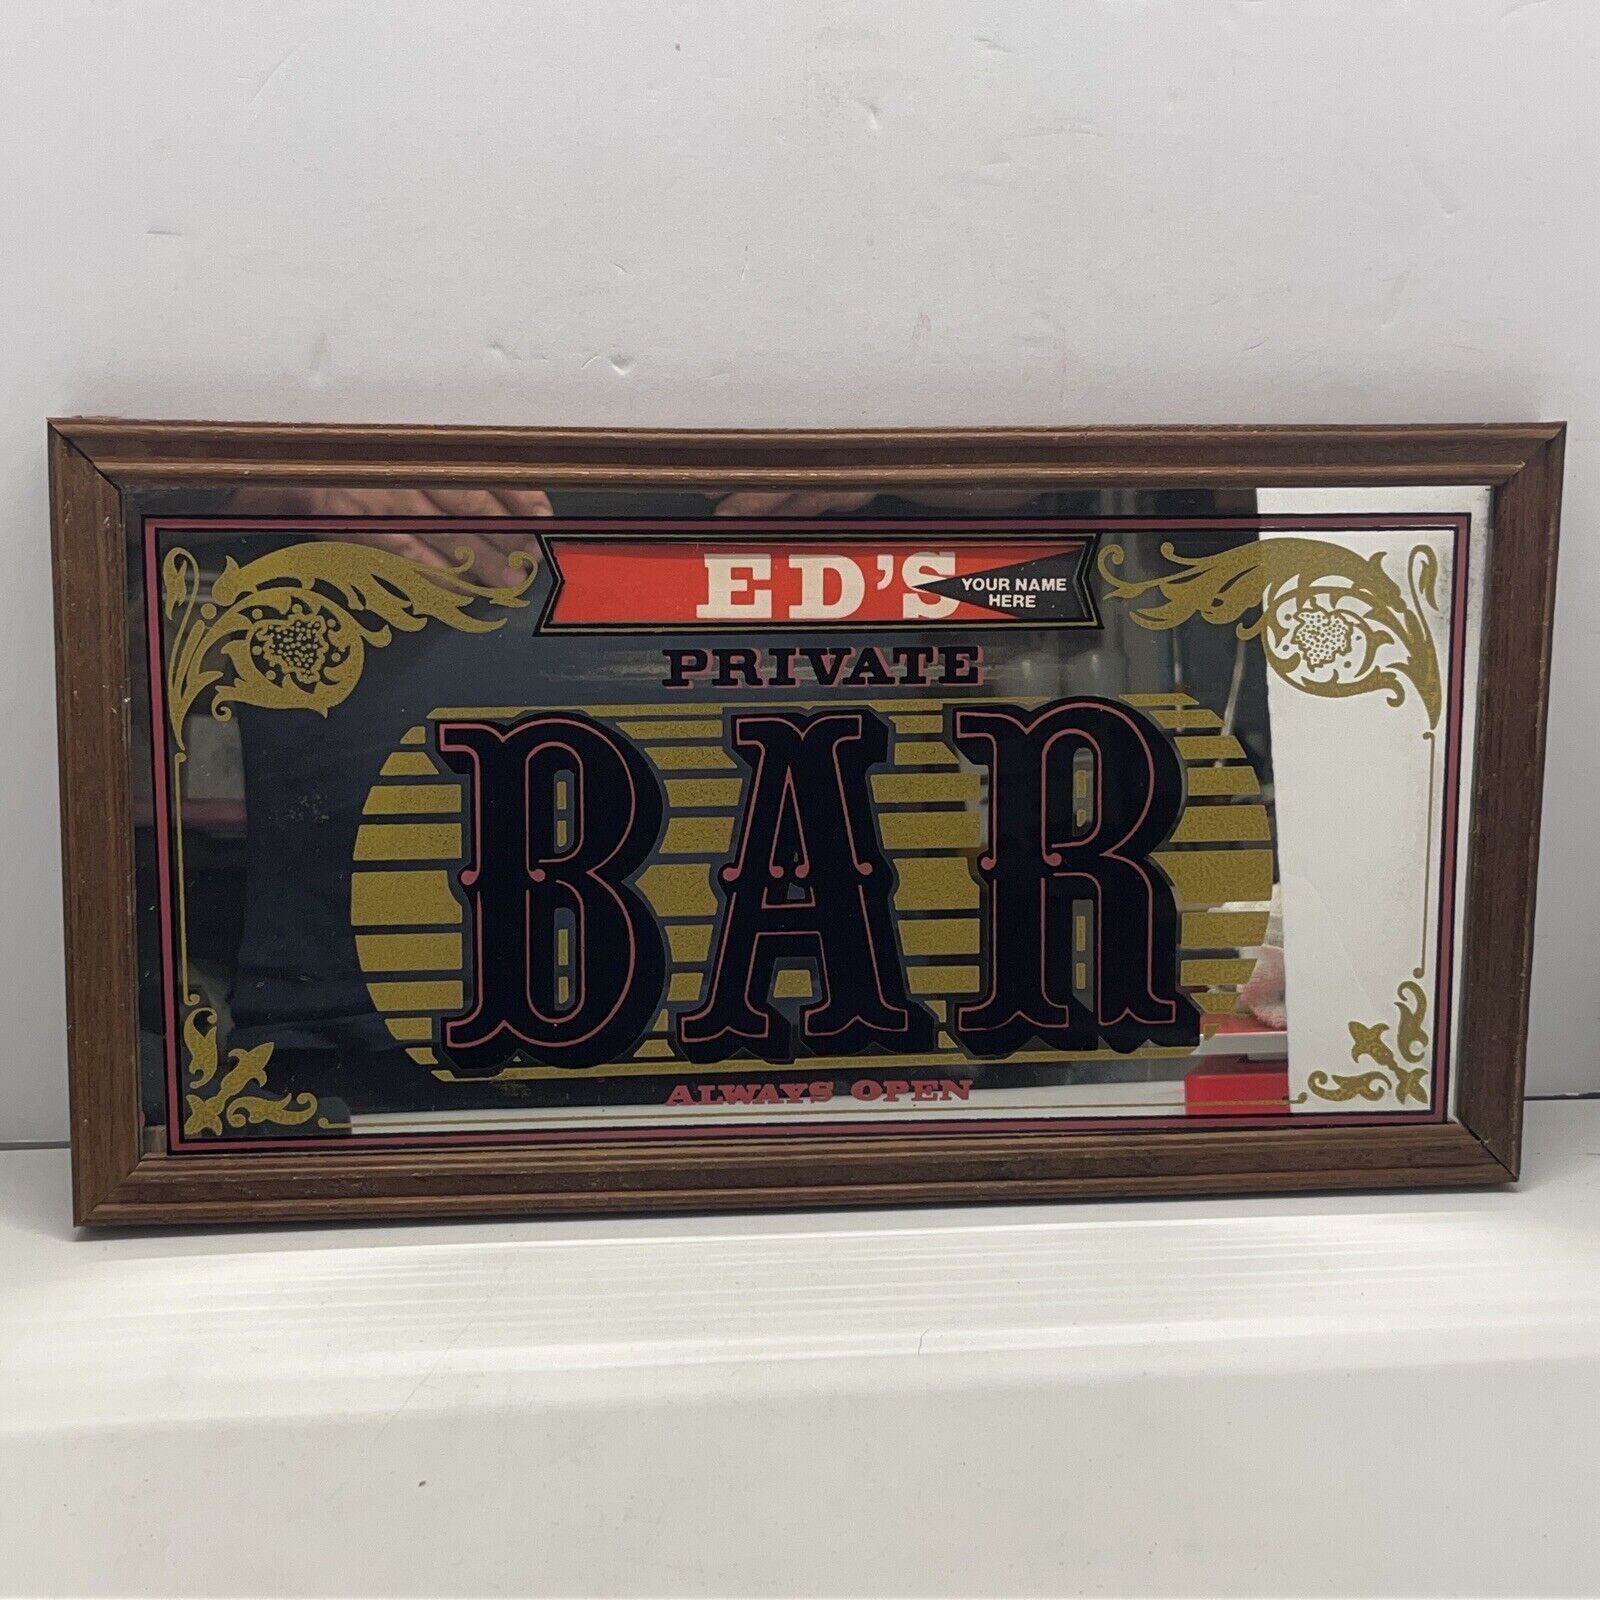 Private Bar MIRROR OPEN 24 HOURS Wood Framed Sign 17\